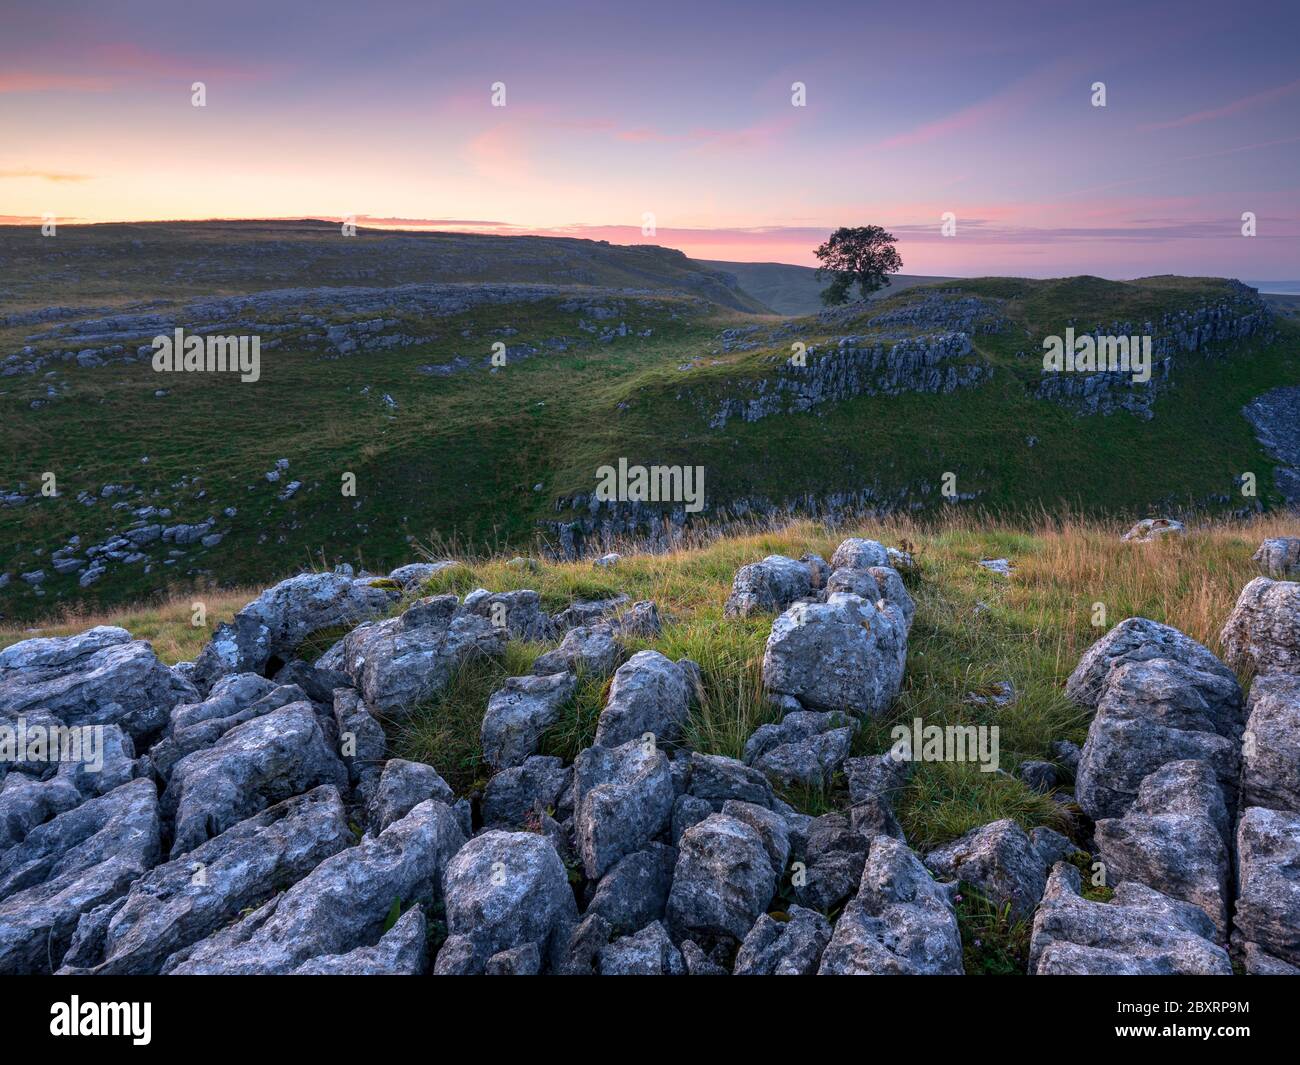 A lone tree cuts the horizon in the limestone valleys at Malham Lings in the Yorkshire Dales National Park. The scene is lit by a subdued sunrise. Stock Photo